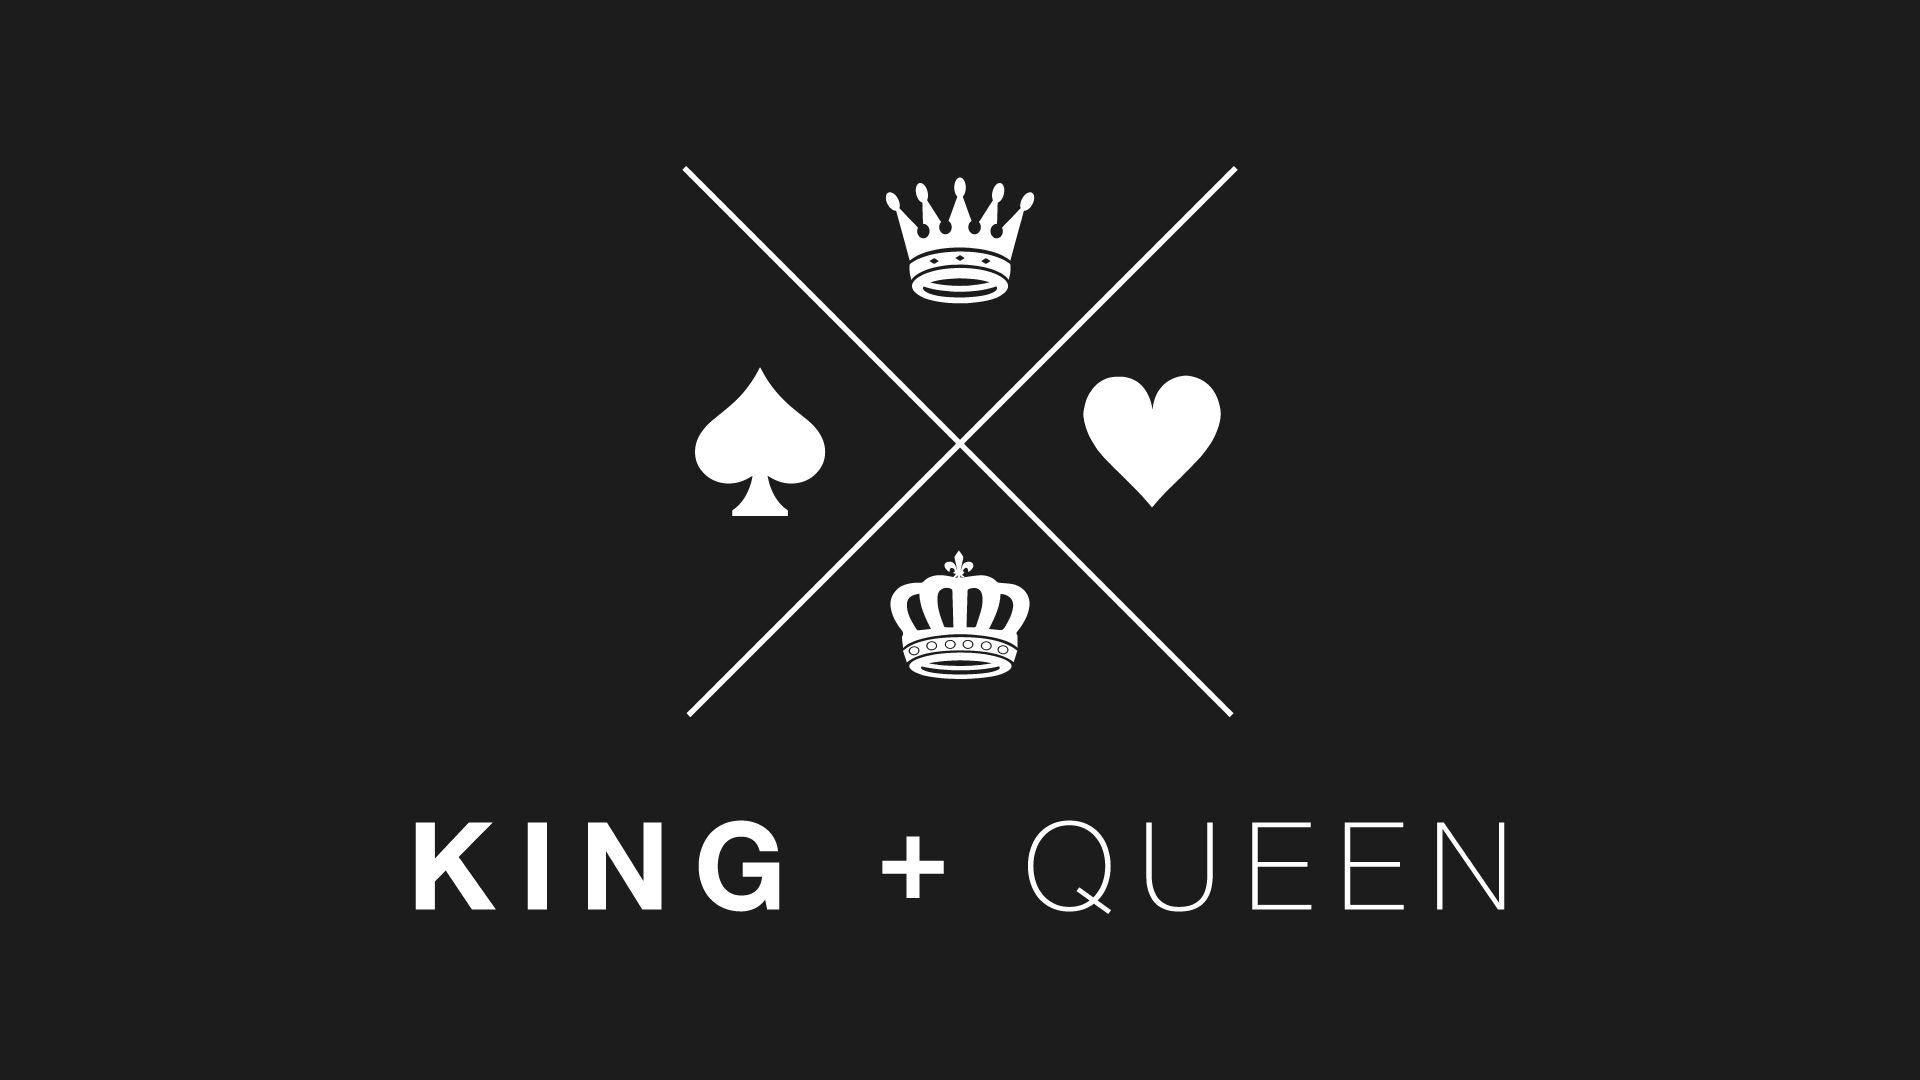 Premium, Luxury, Pure - King and Queen Beverages